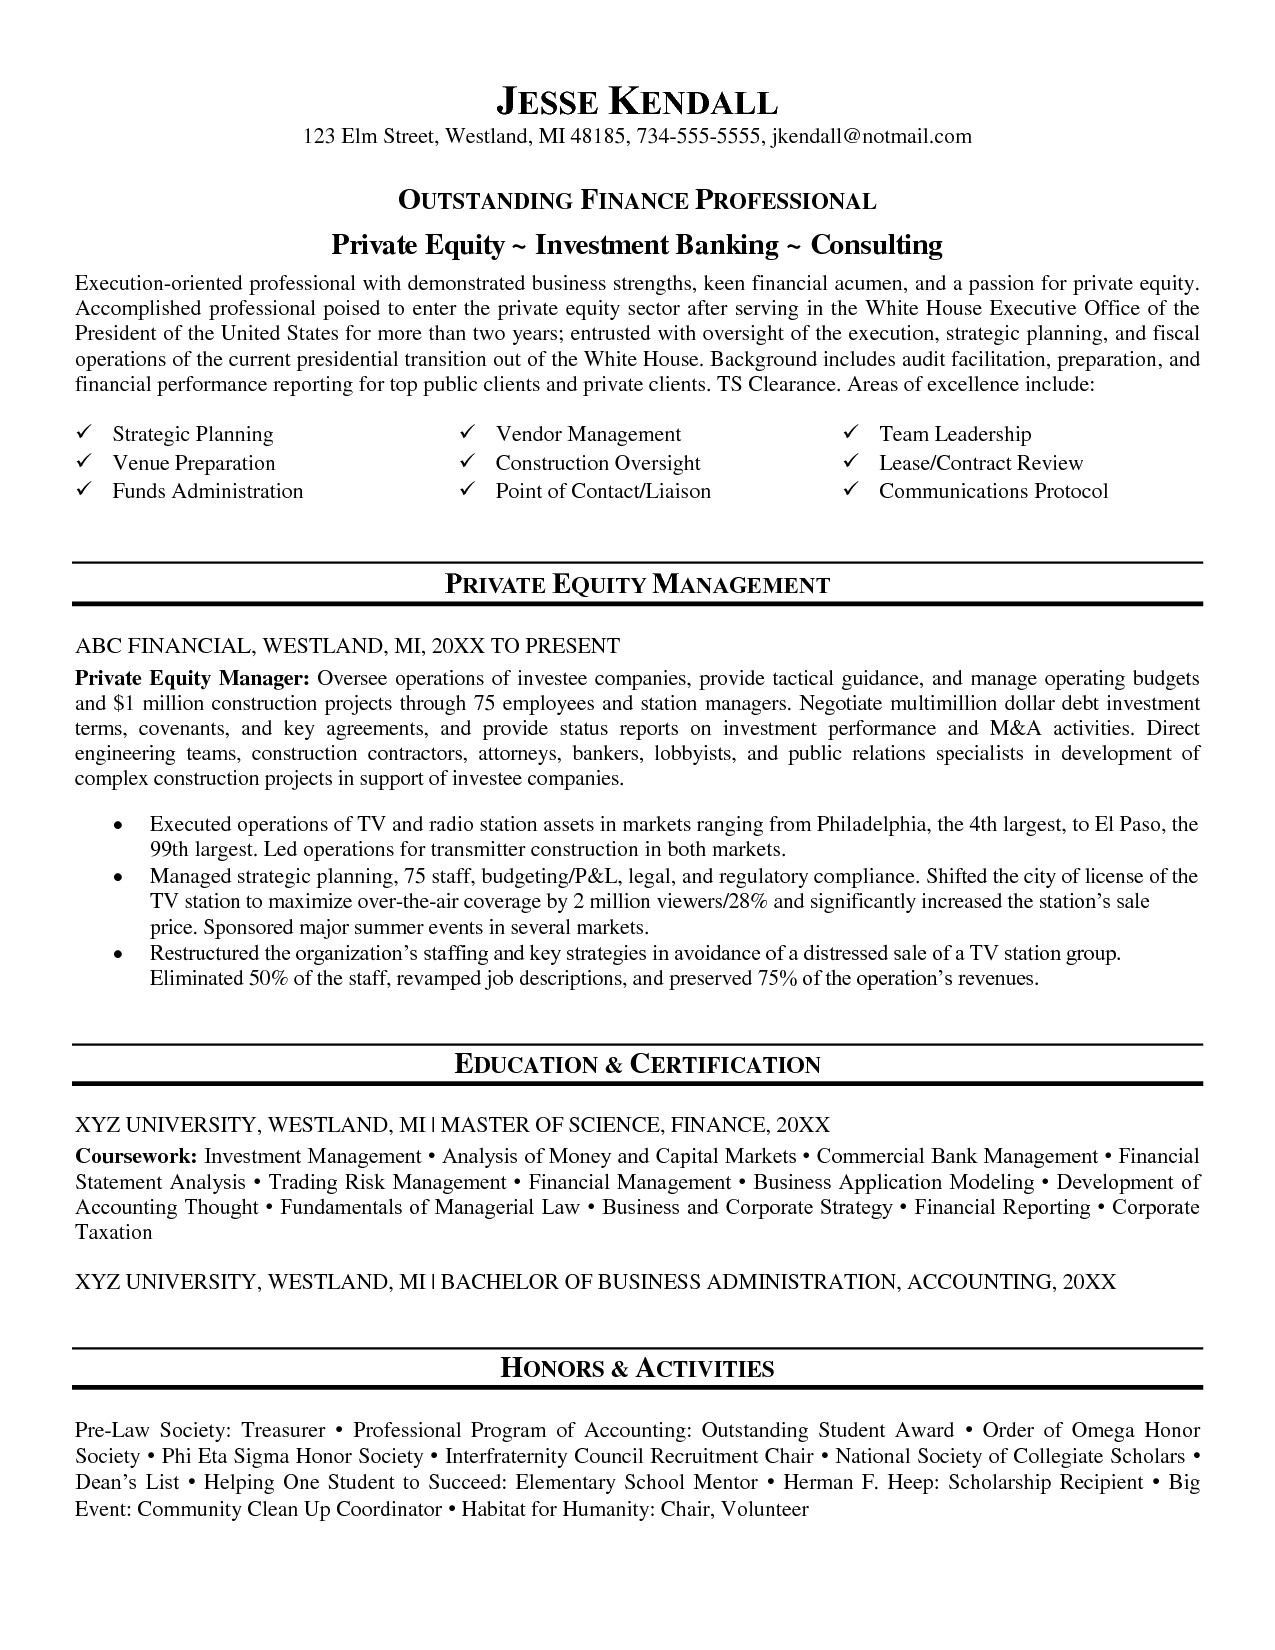 private equity resume